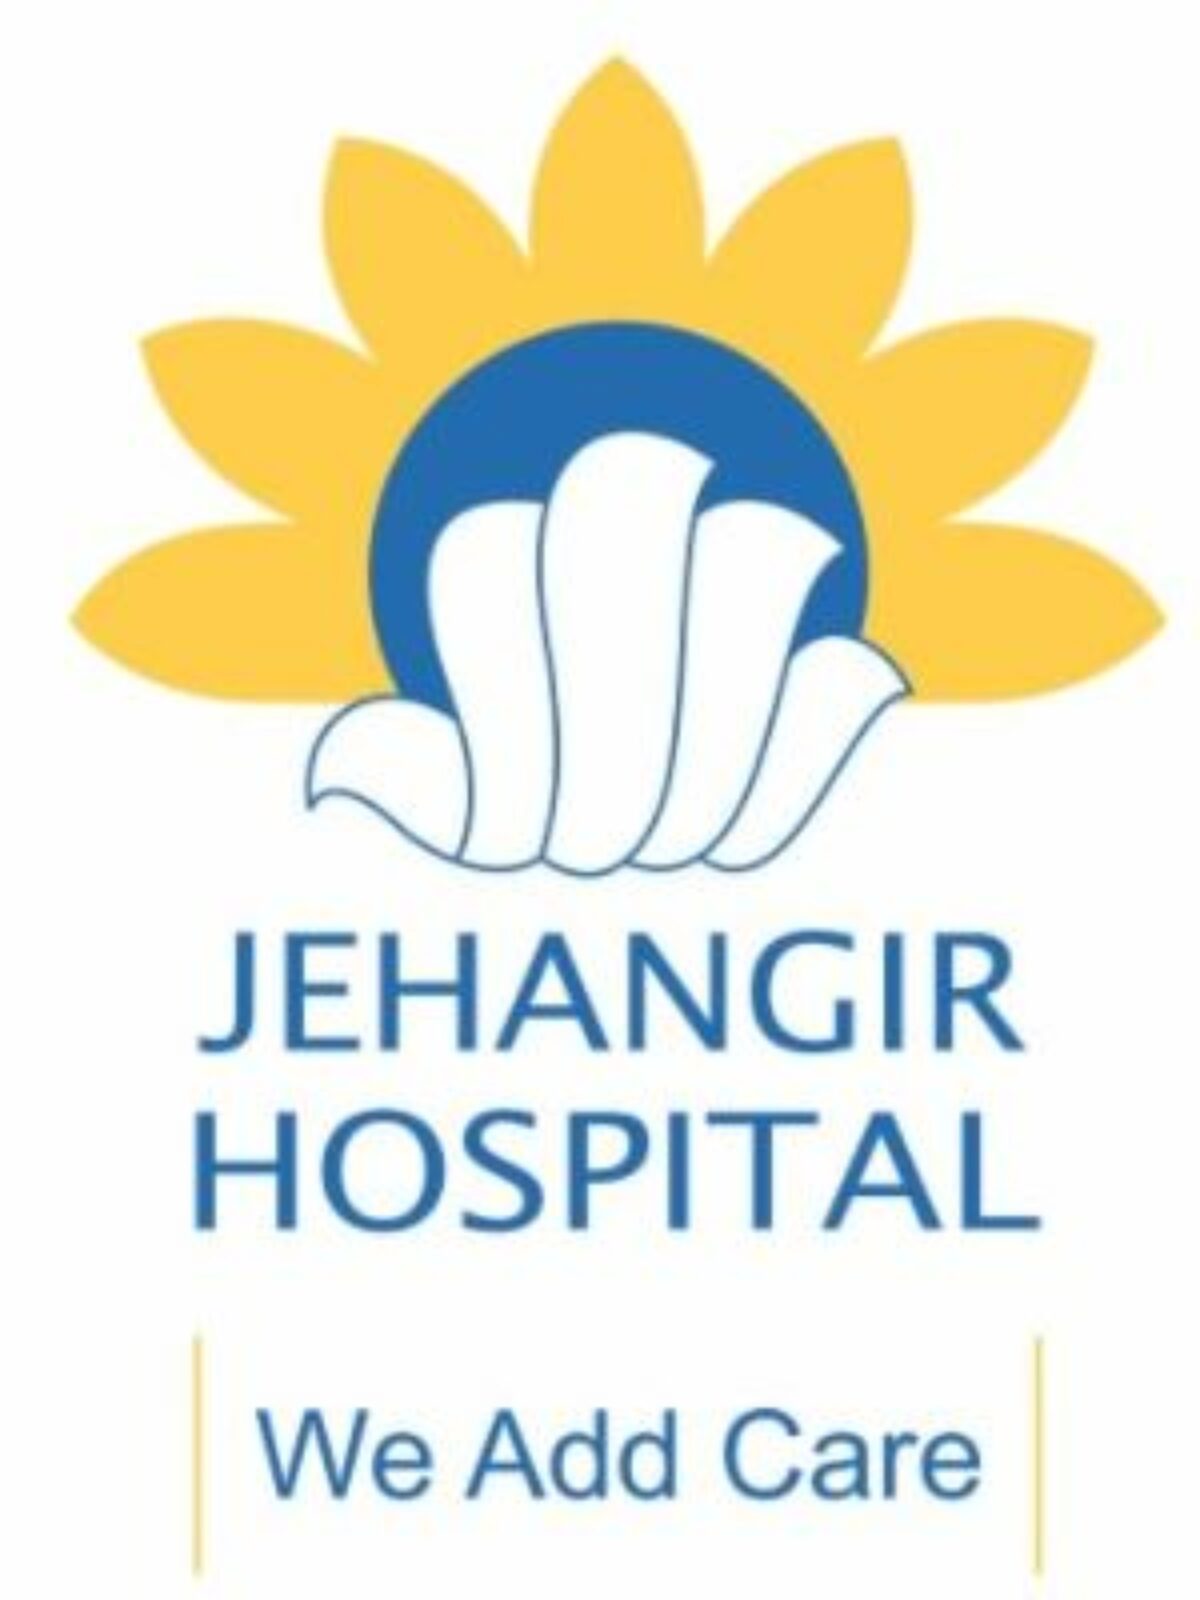 Jehangir Hospital Launches State-of-the-art Upgraded Mother and Child Center